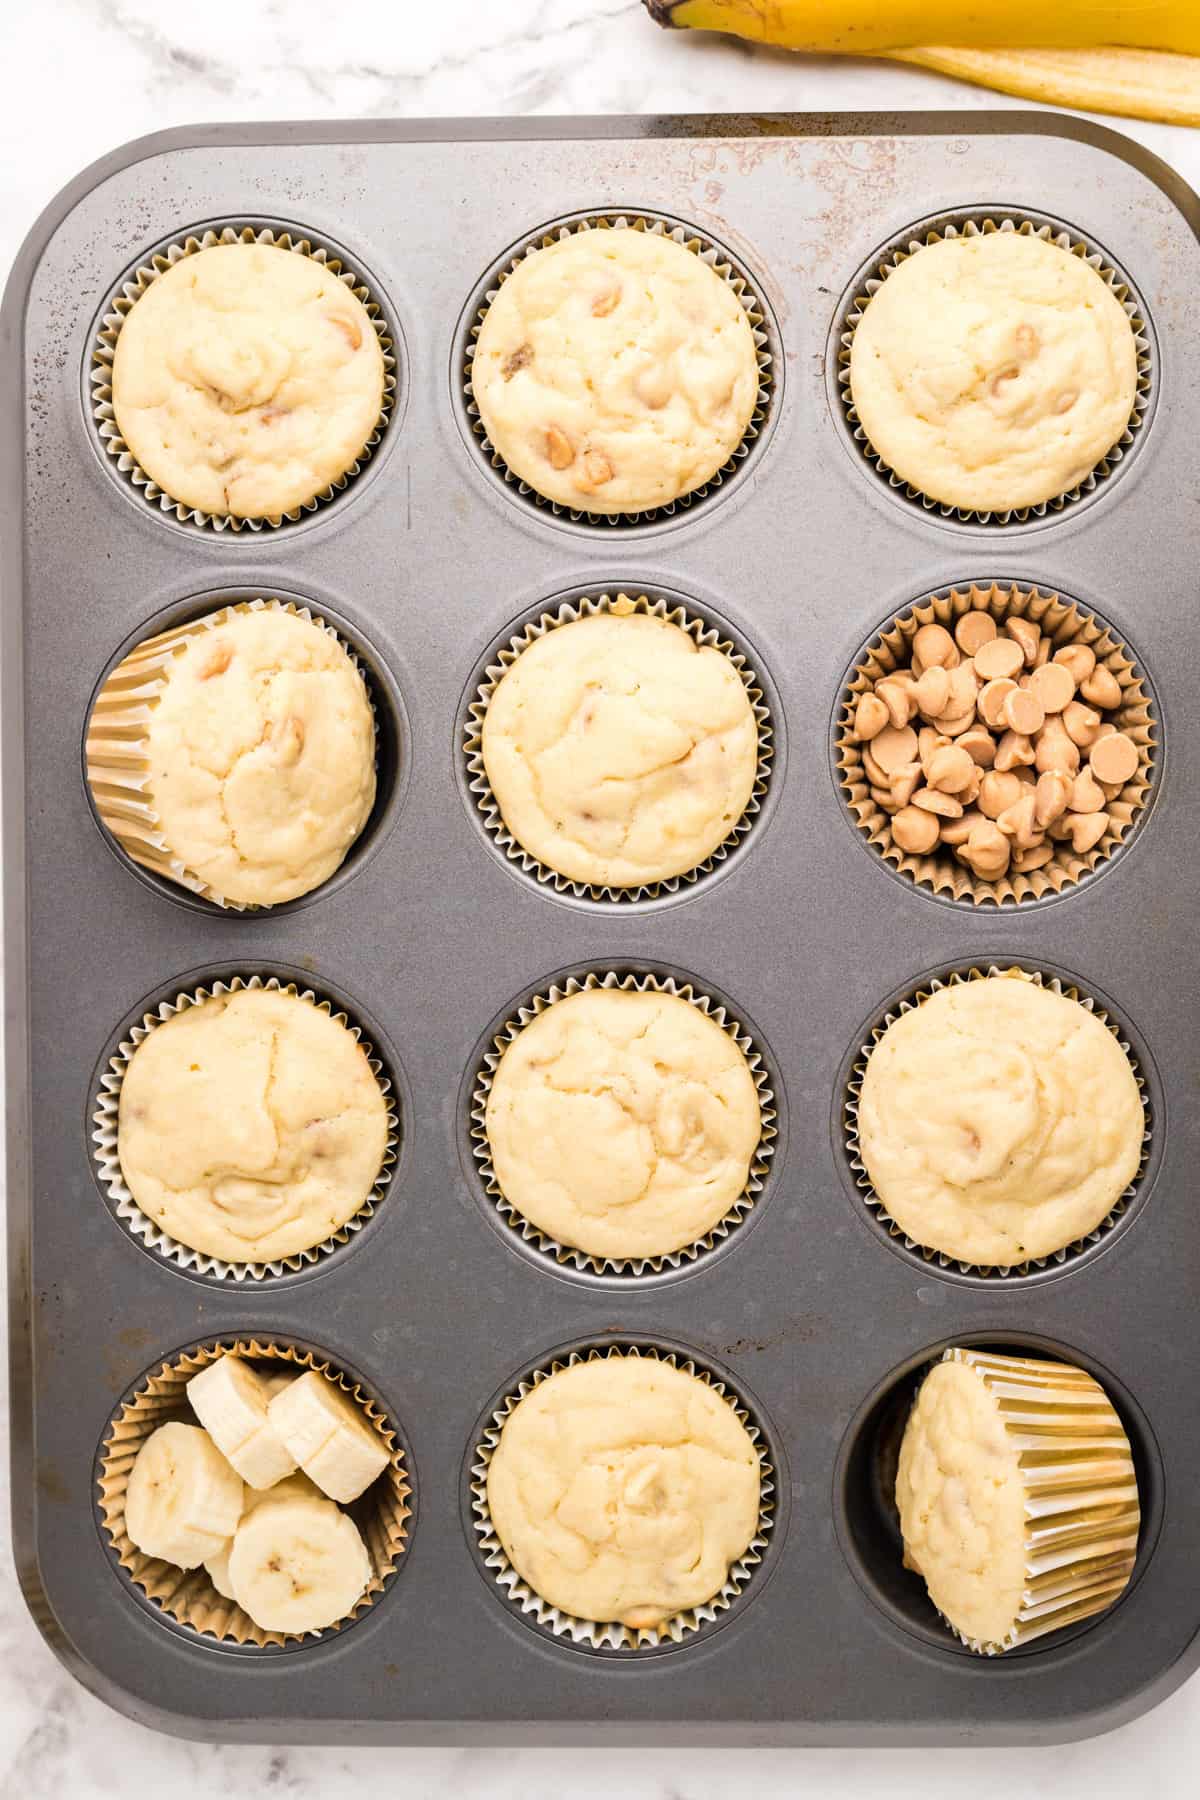 Finished Pancake Muffins in baking tin with some wells filled up with bananas and peanut butter chips.